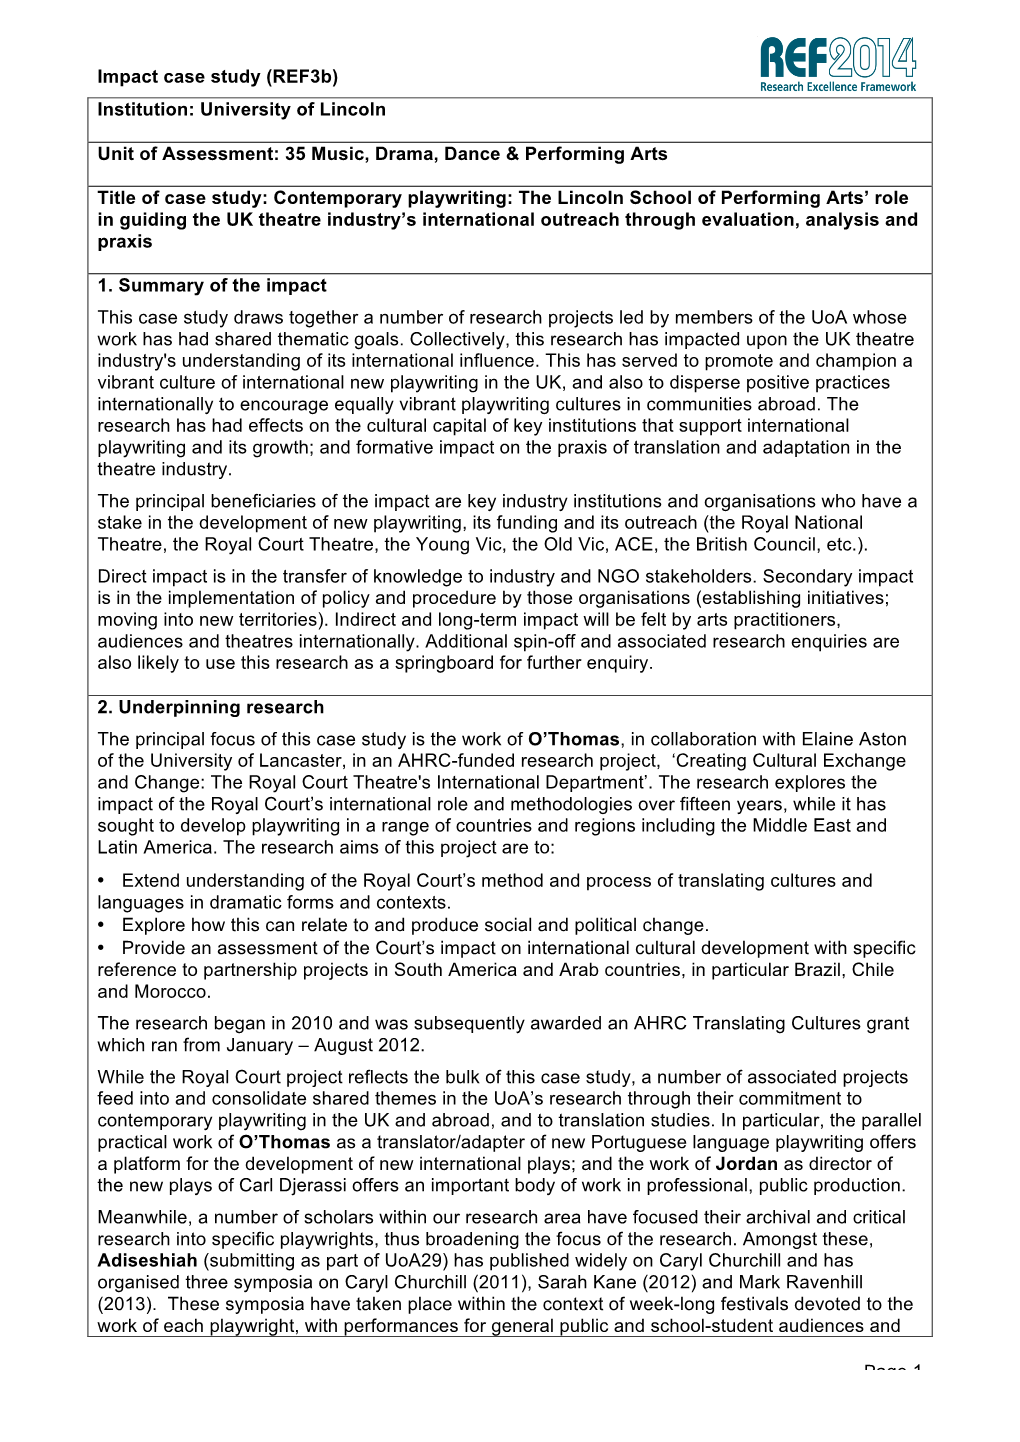 Impact Case Study (Ref3b) Page 1 Institution: University of Lincoln Unit